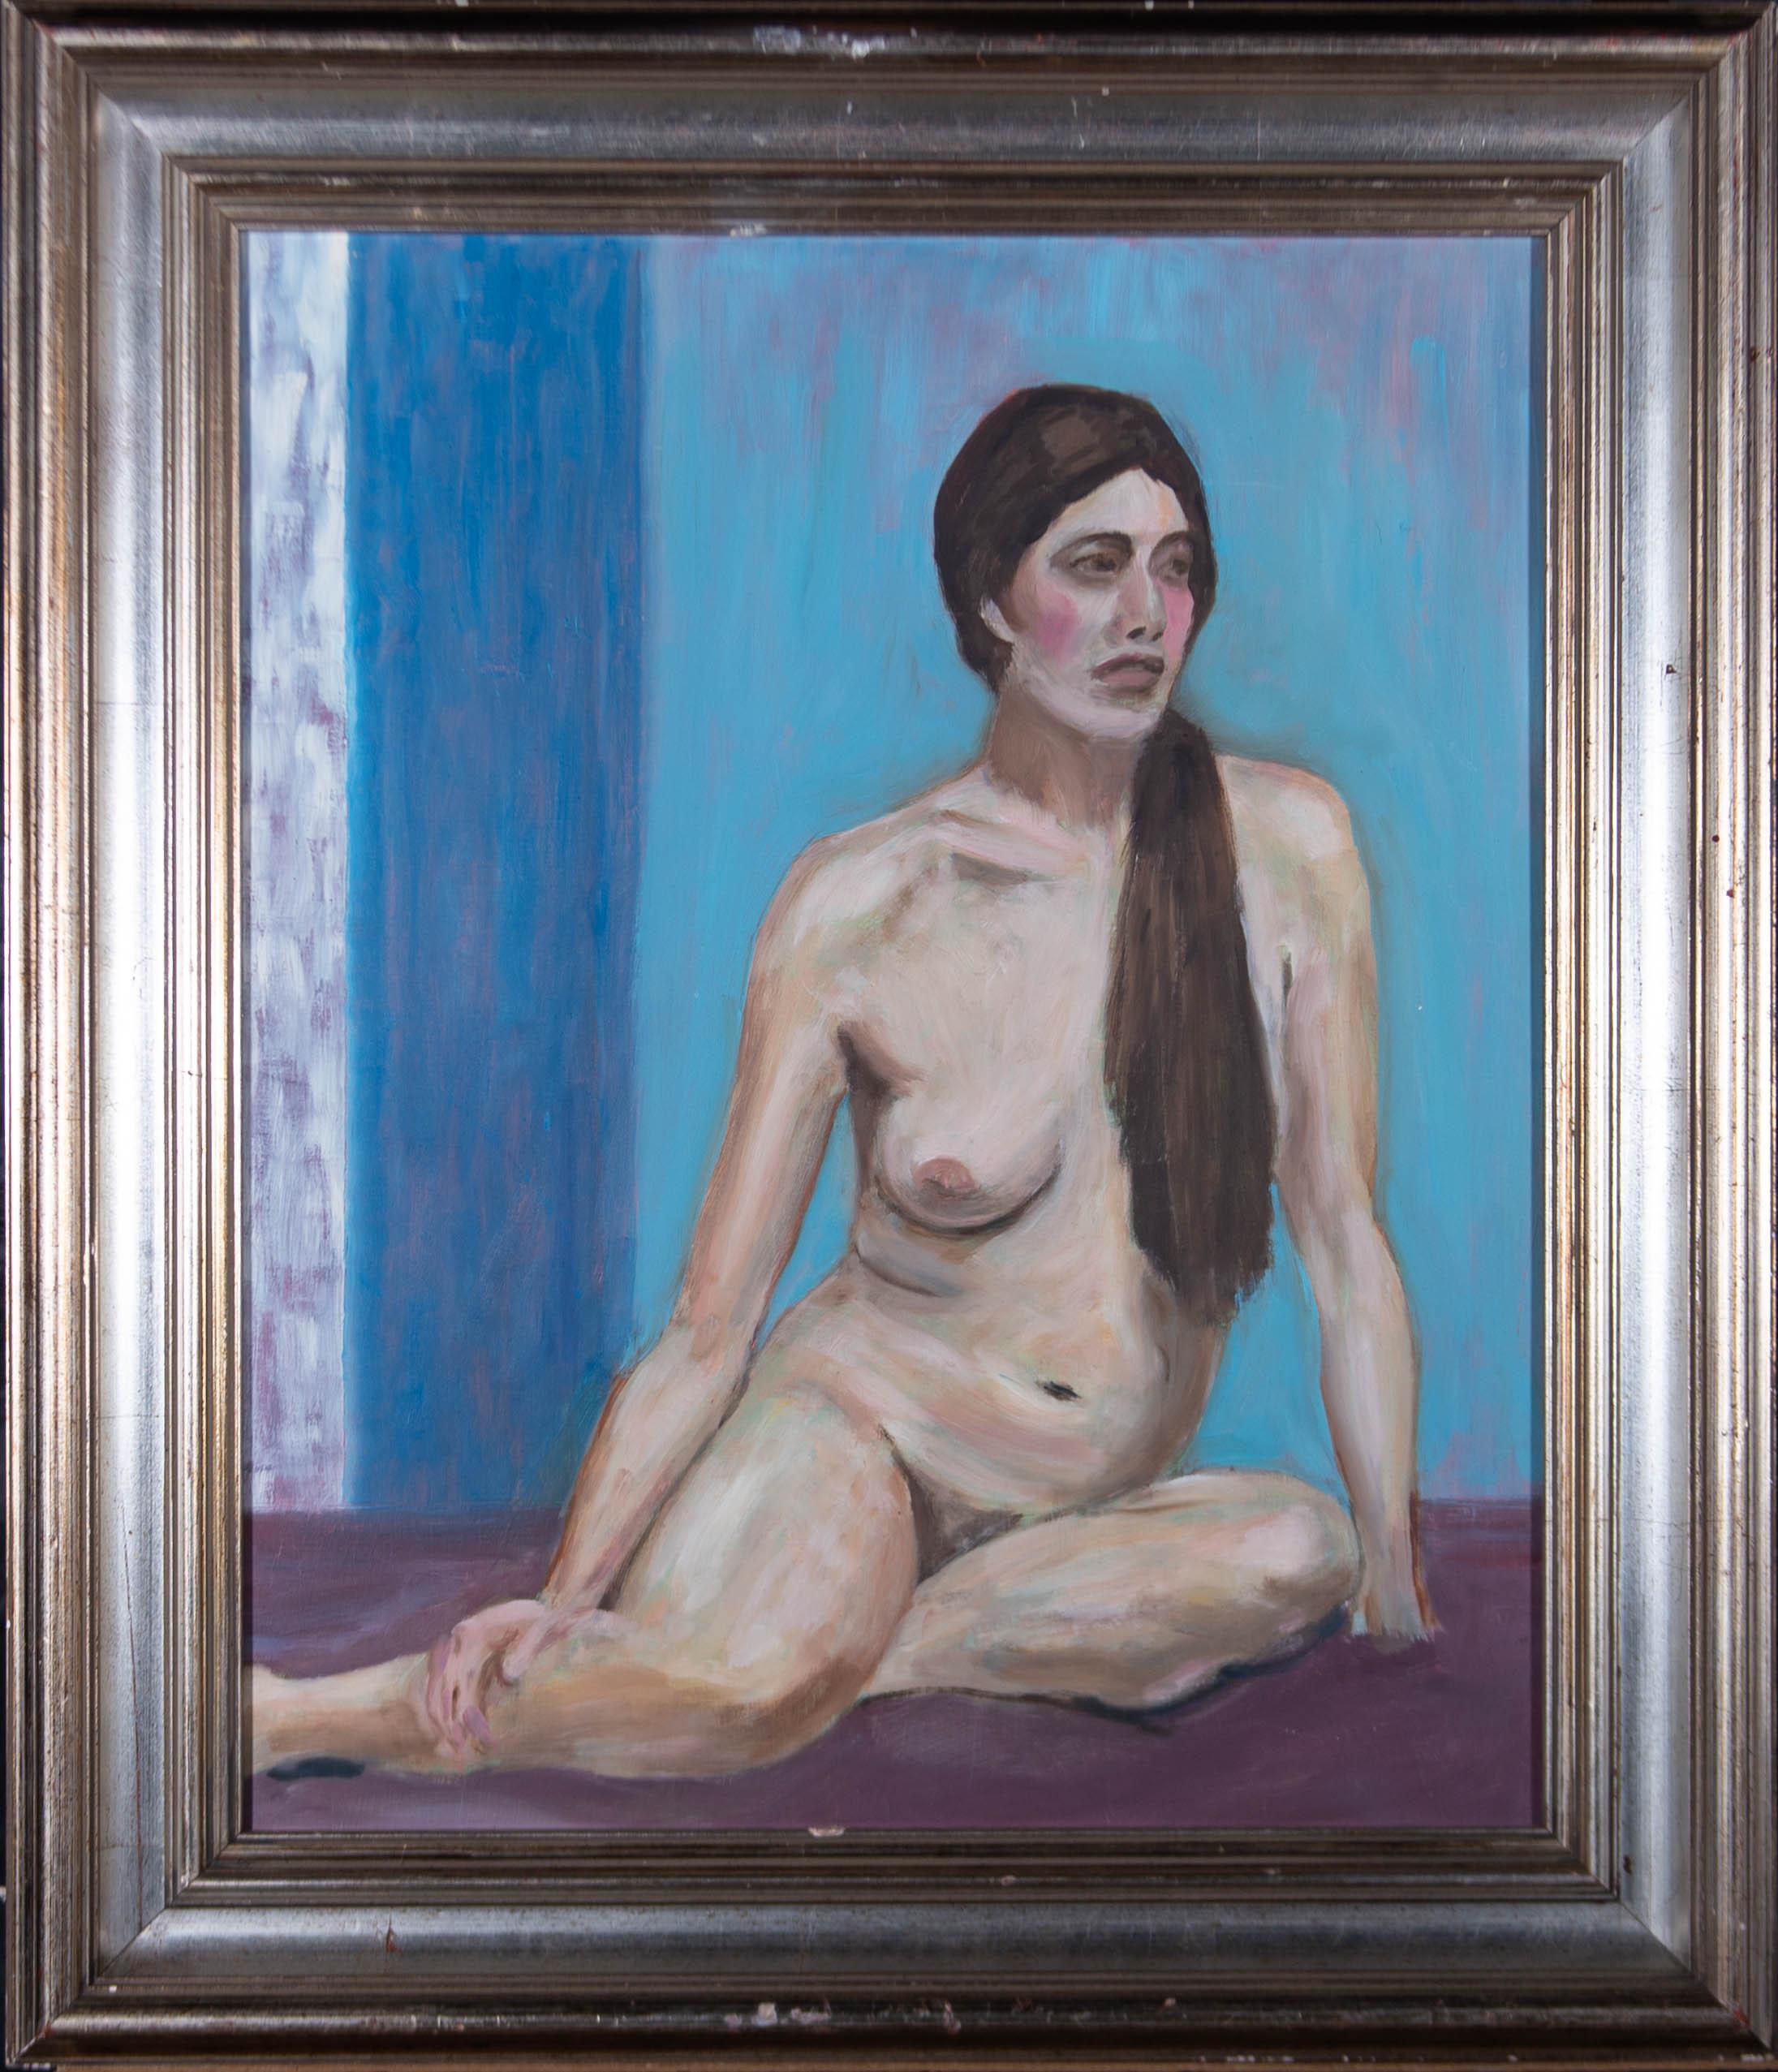 20th Century Oil - Nude Portrait of a Woman - Painting by Unknown